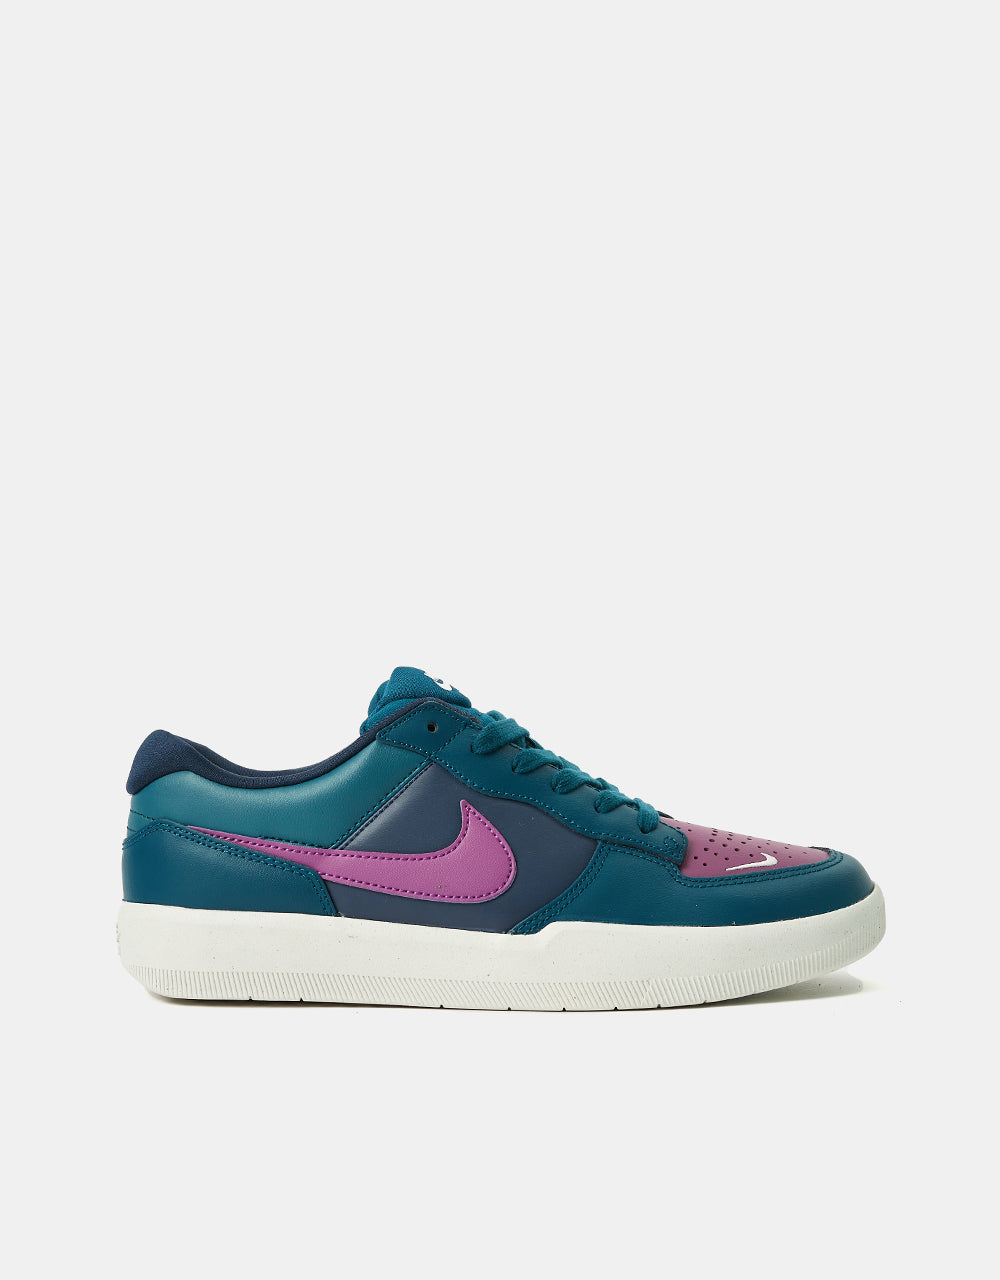 Nike SB Force 58 Premium Skate Shoes - Obsidian/Viotech-Midnight Turqu –  Route One